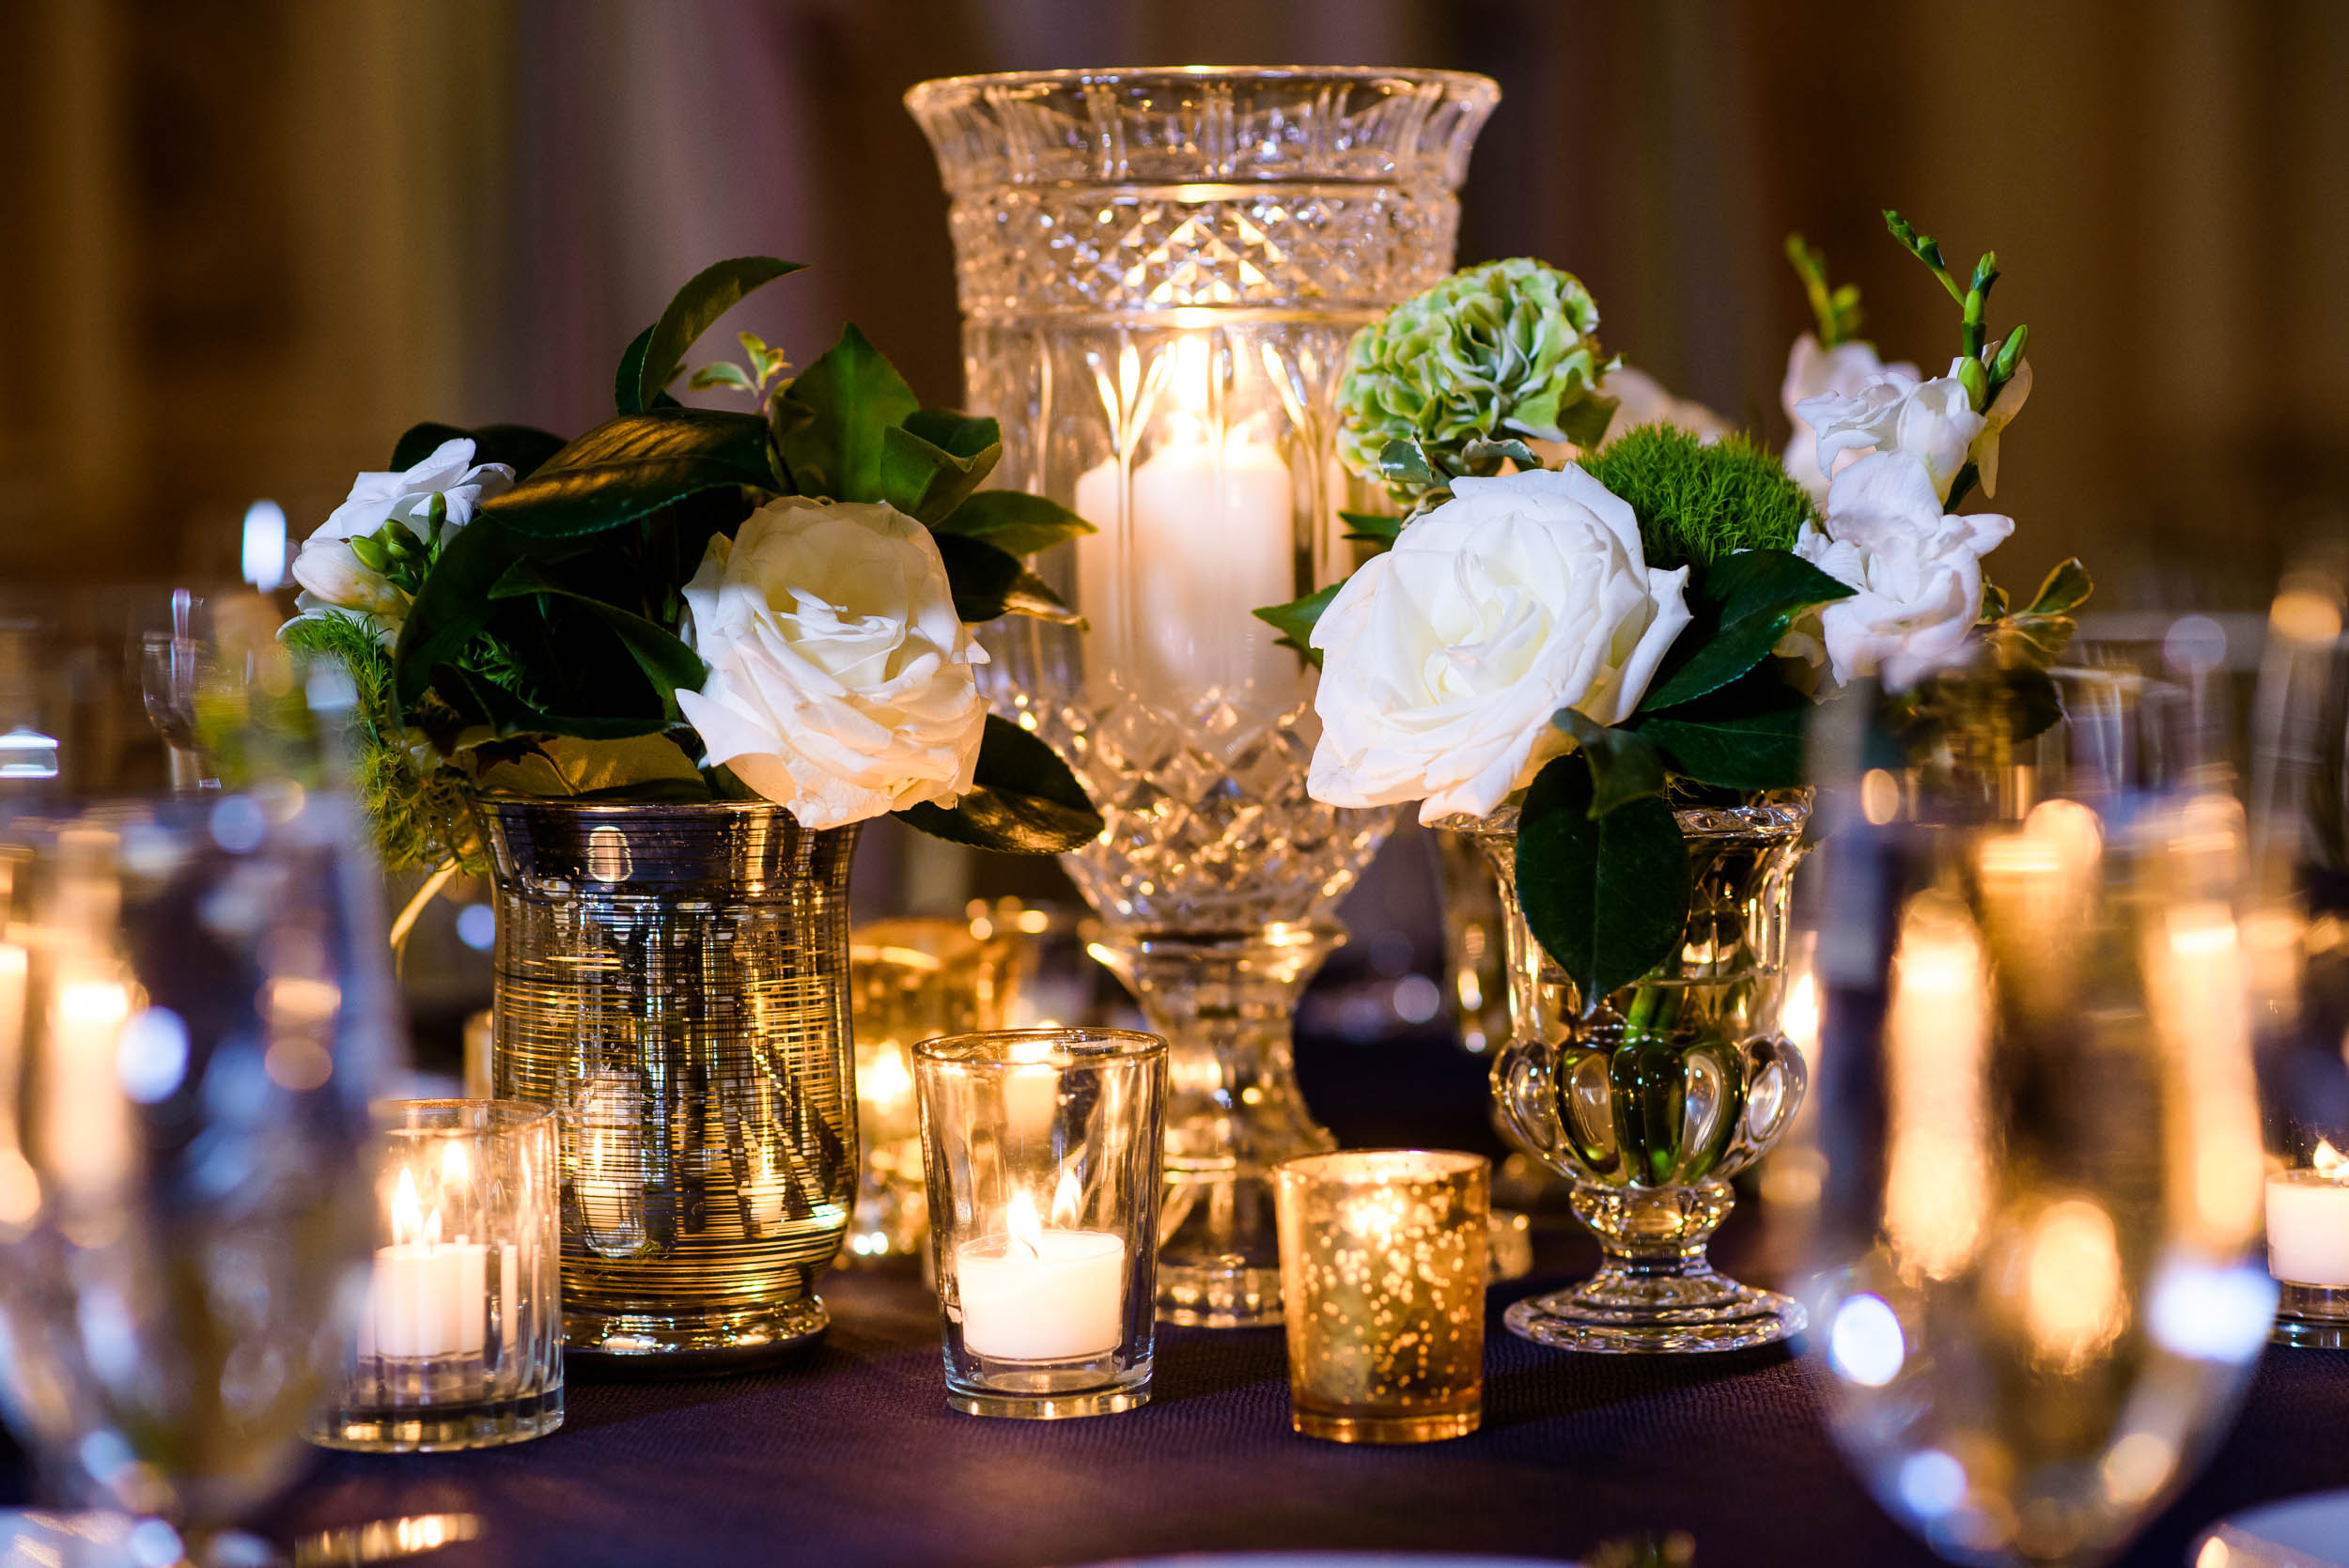 Wedding reception details for luxurious fall wedding at the Chicago Symphony Center captured by J. Brown Photography. See more wedding ideas at jbrownphotography.com!